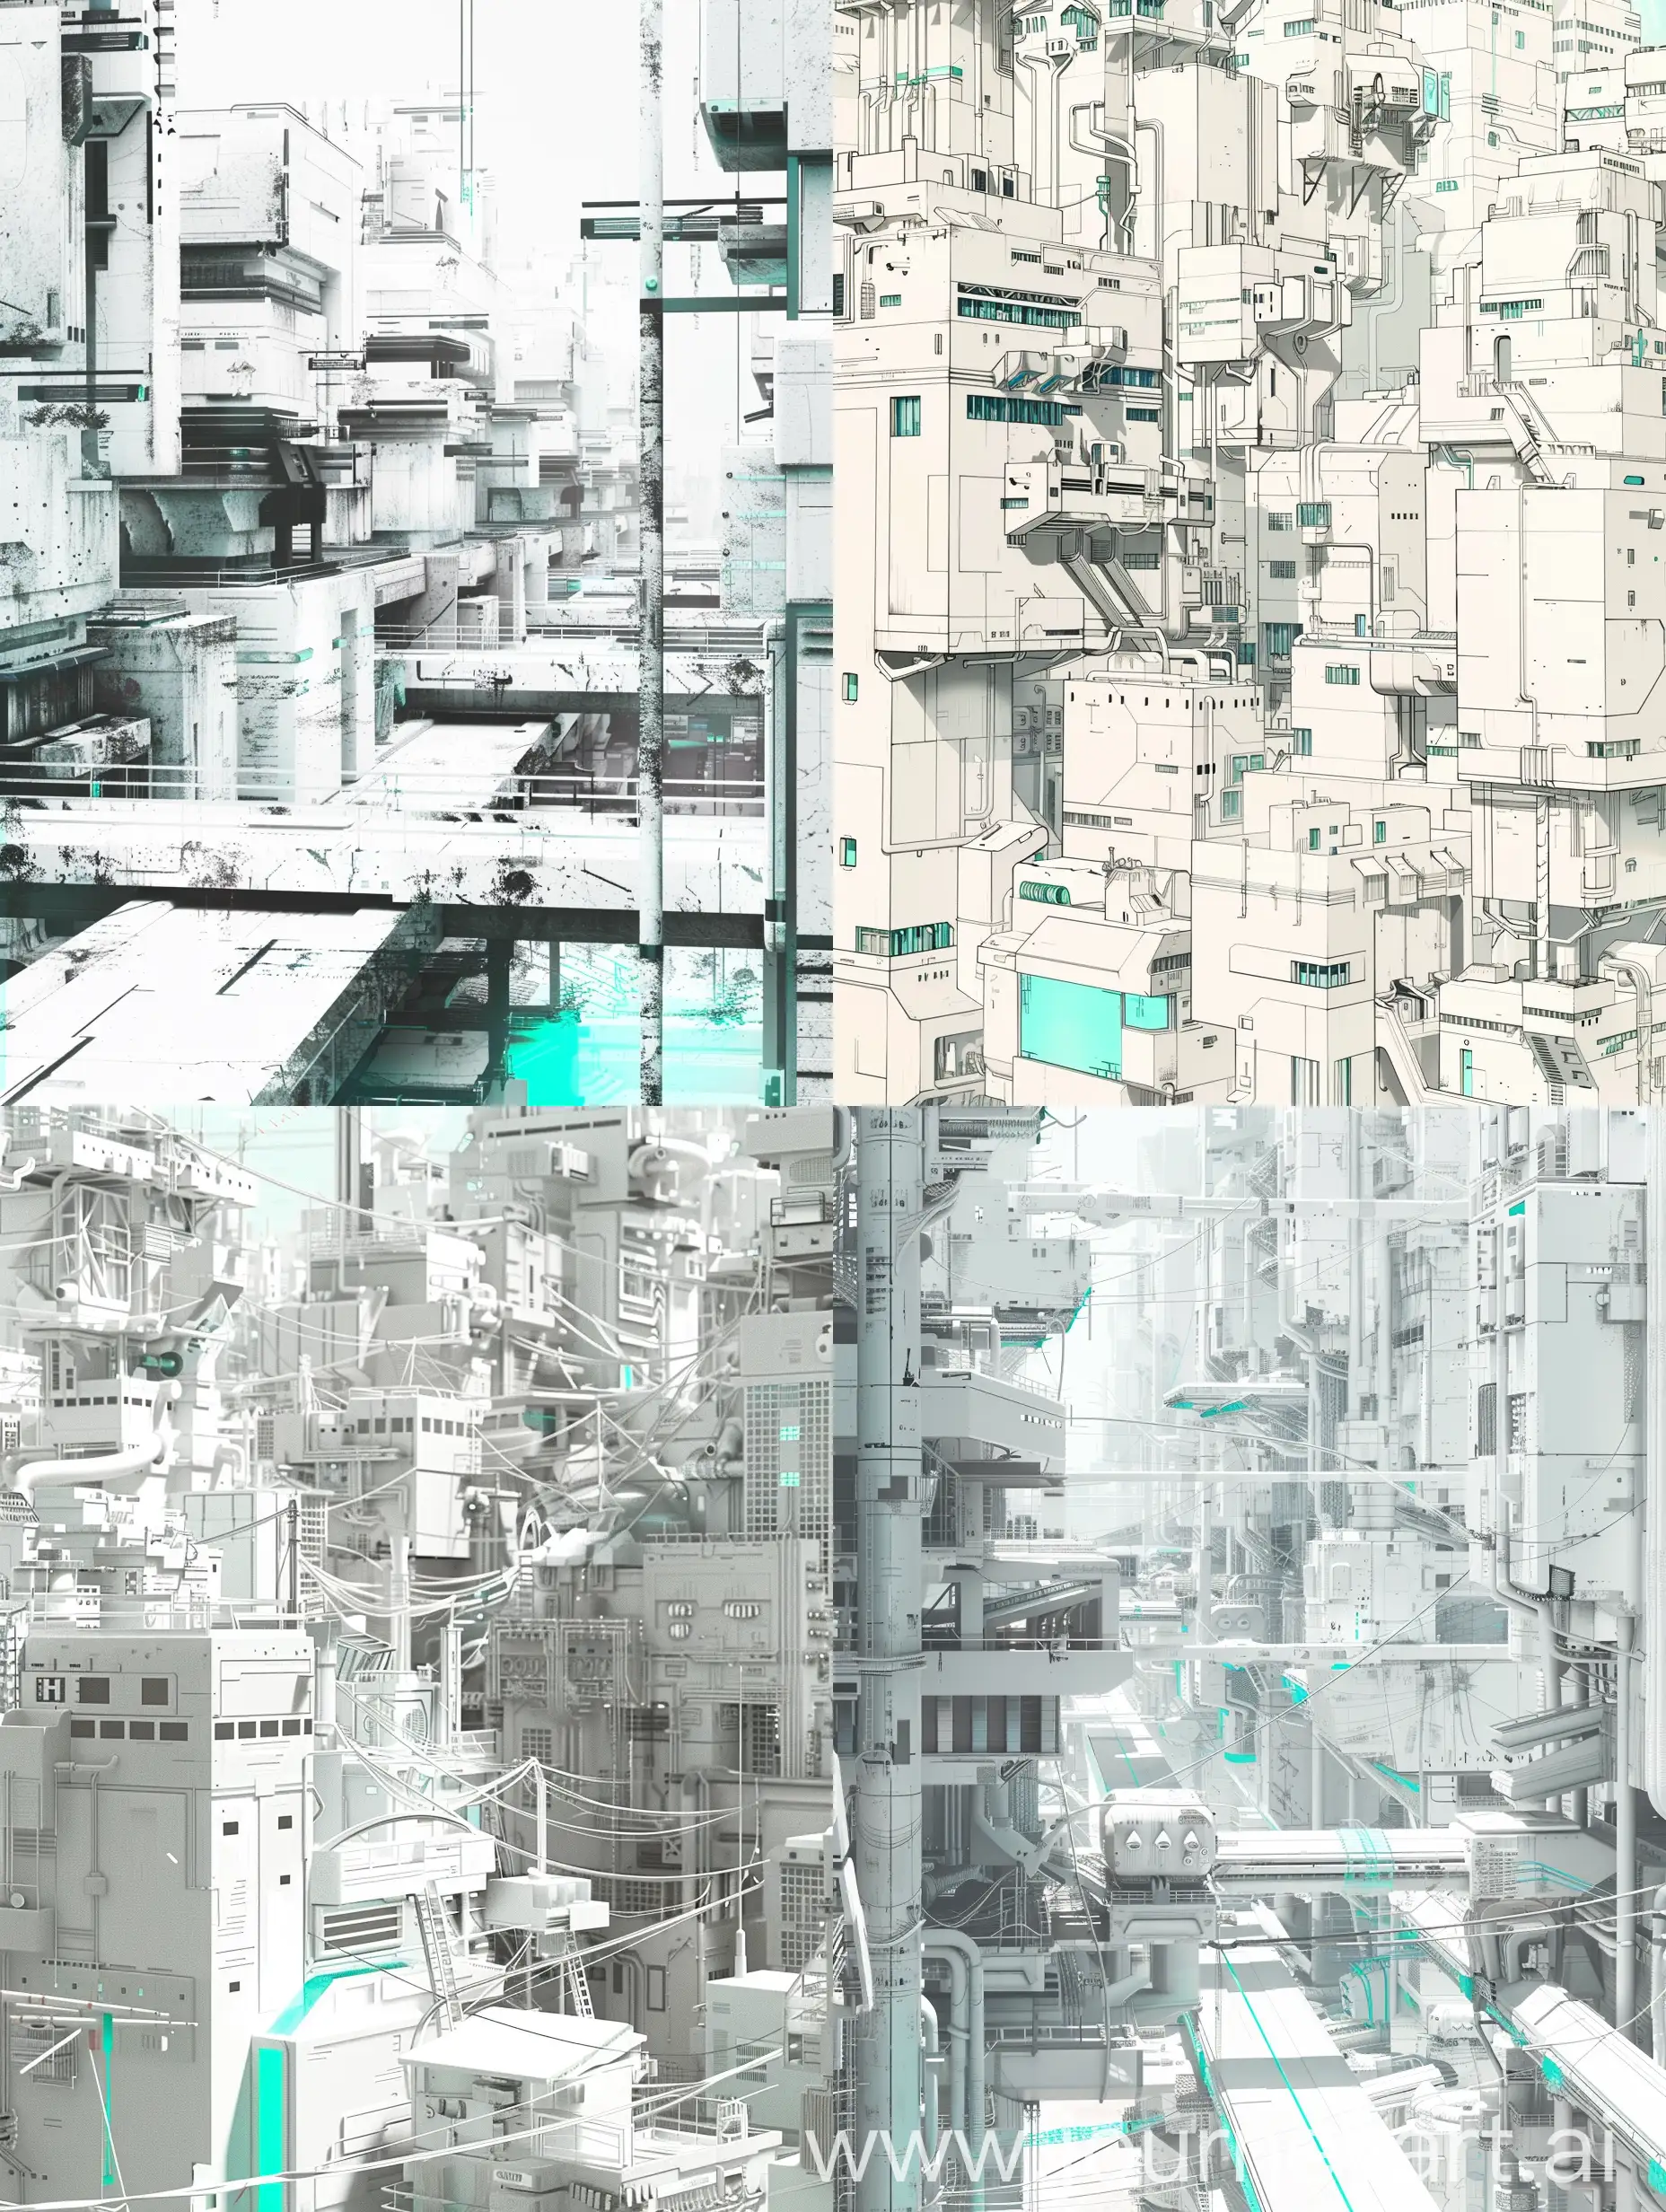 Cyberpunk-Anime-Style-Shantytowns-with-Turquoise-Tint